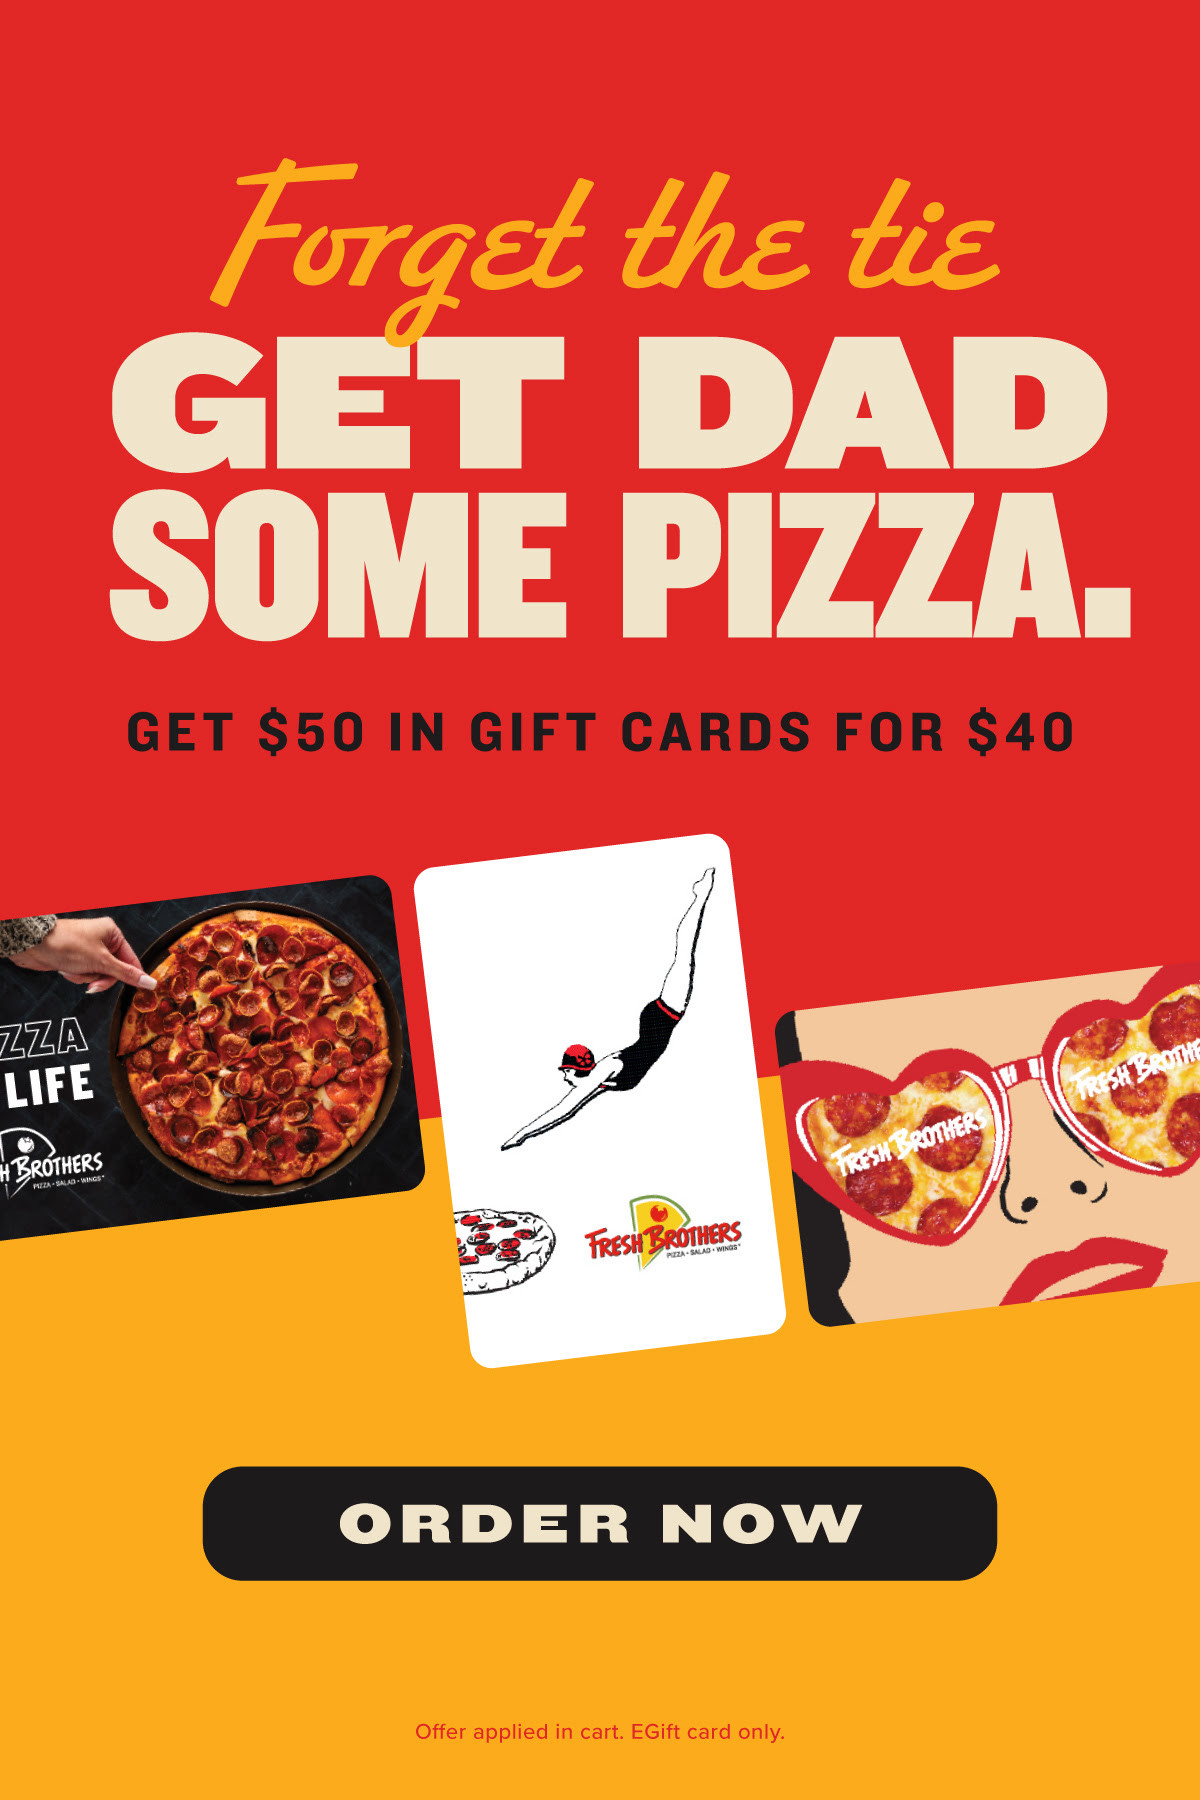 Fresh Brothers Father's Day [Father's Day] Buy $50 eGift Cards for Just $40